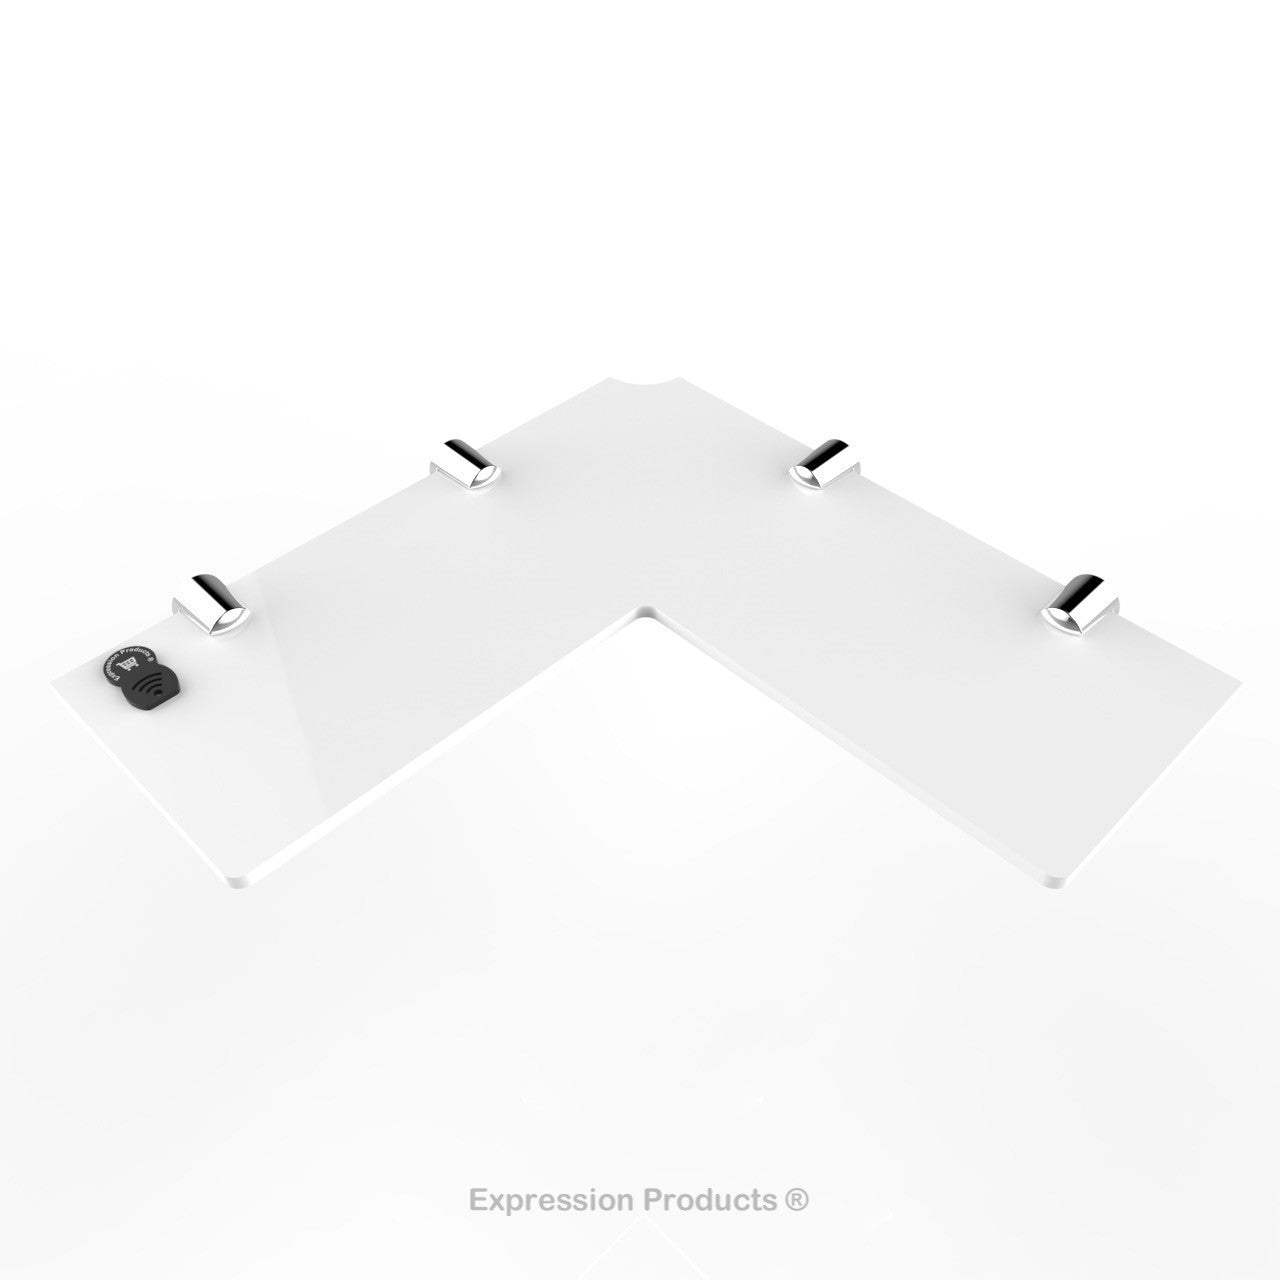 Corner Acrylic Shelf With Cable Feed Through - Style 003 - Expression Products Ltd